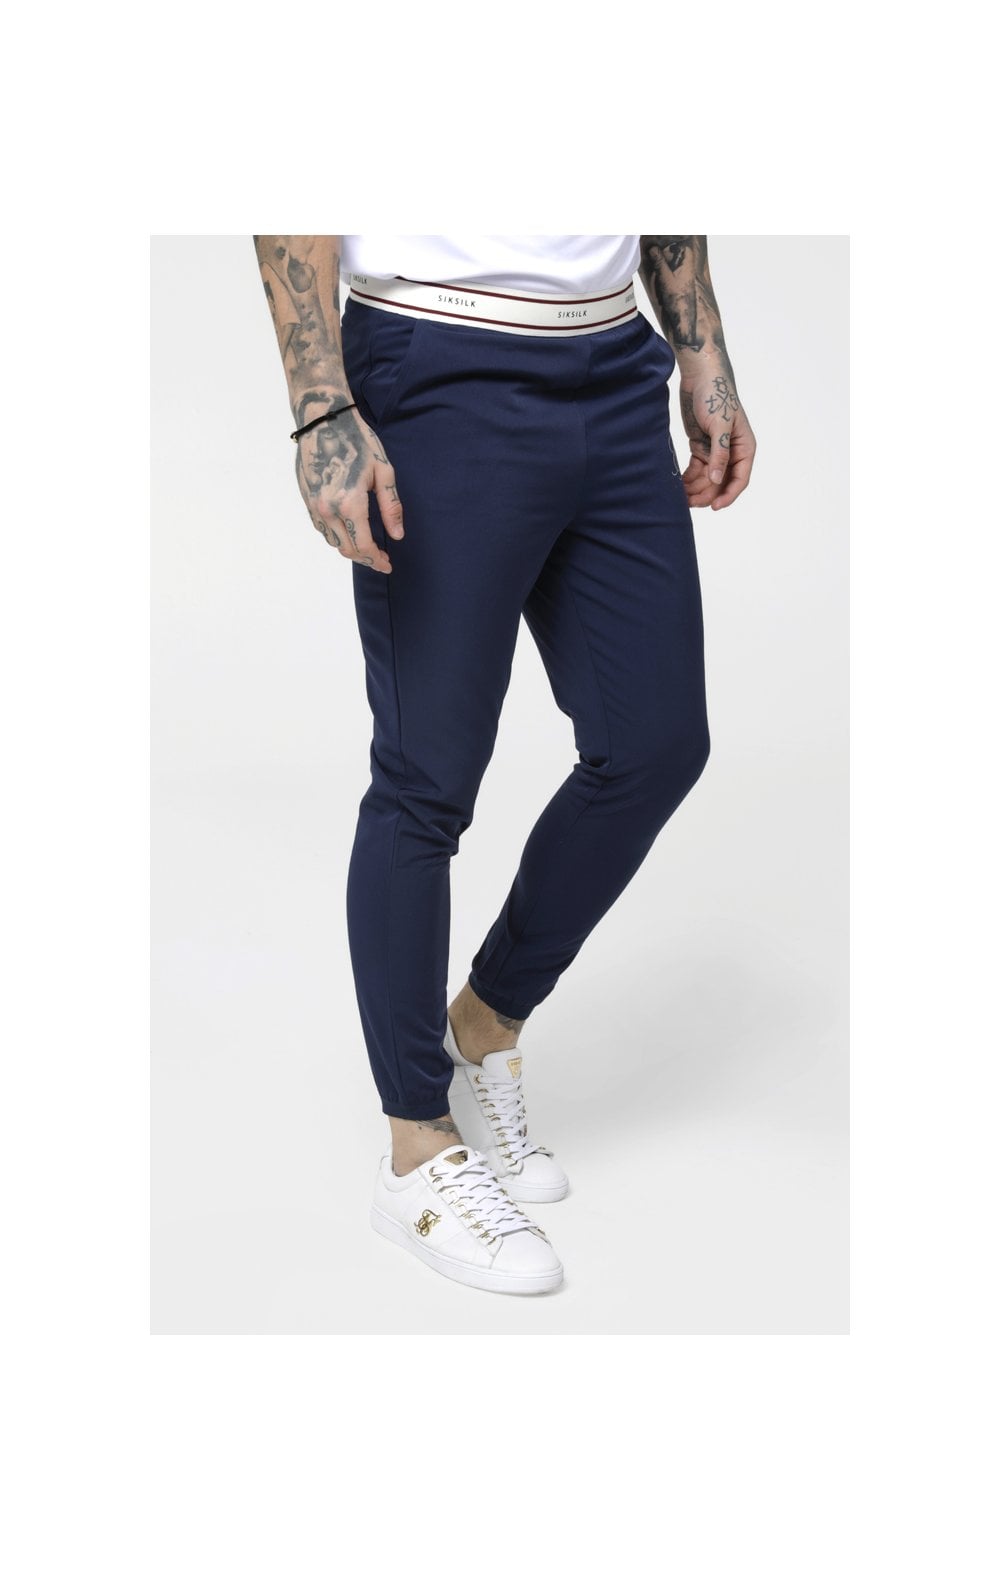 Load image into Gallery viewer, SikSilk Starlite Pursuit Pants - Navy (1)